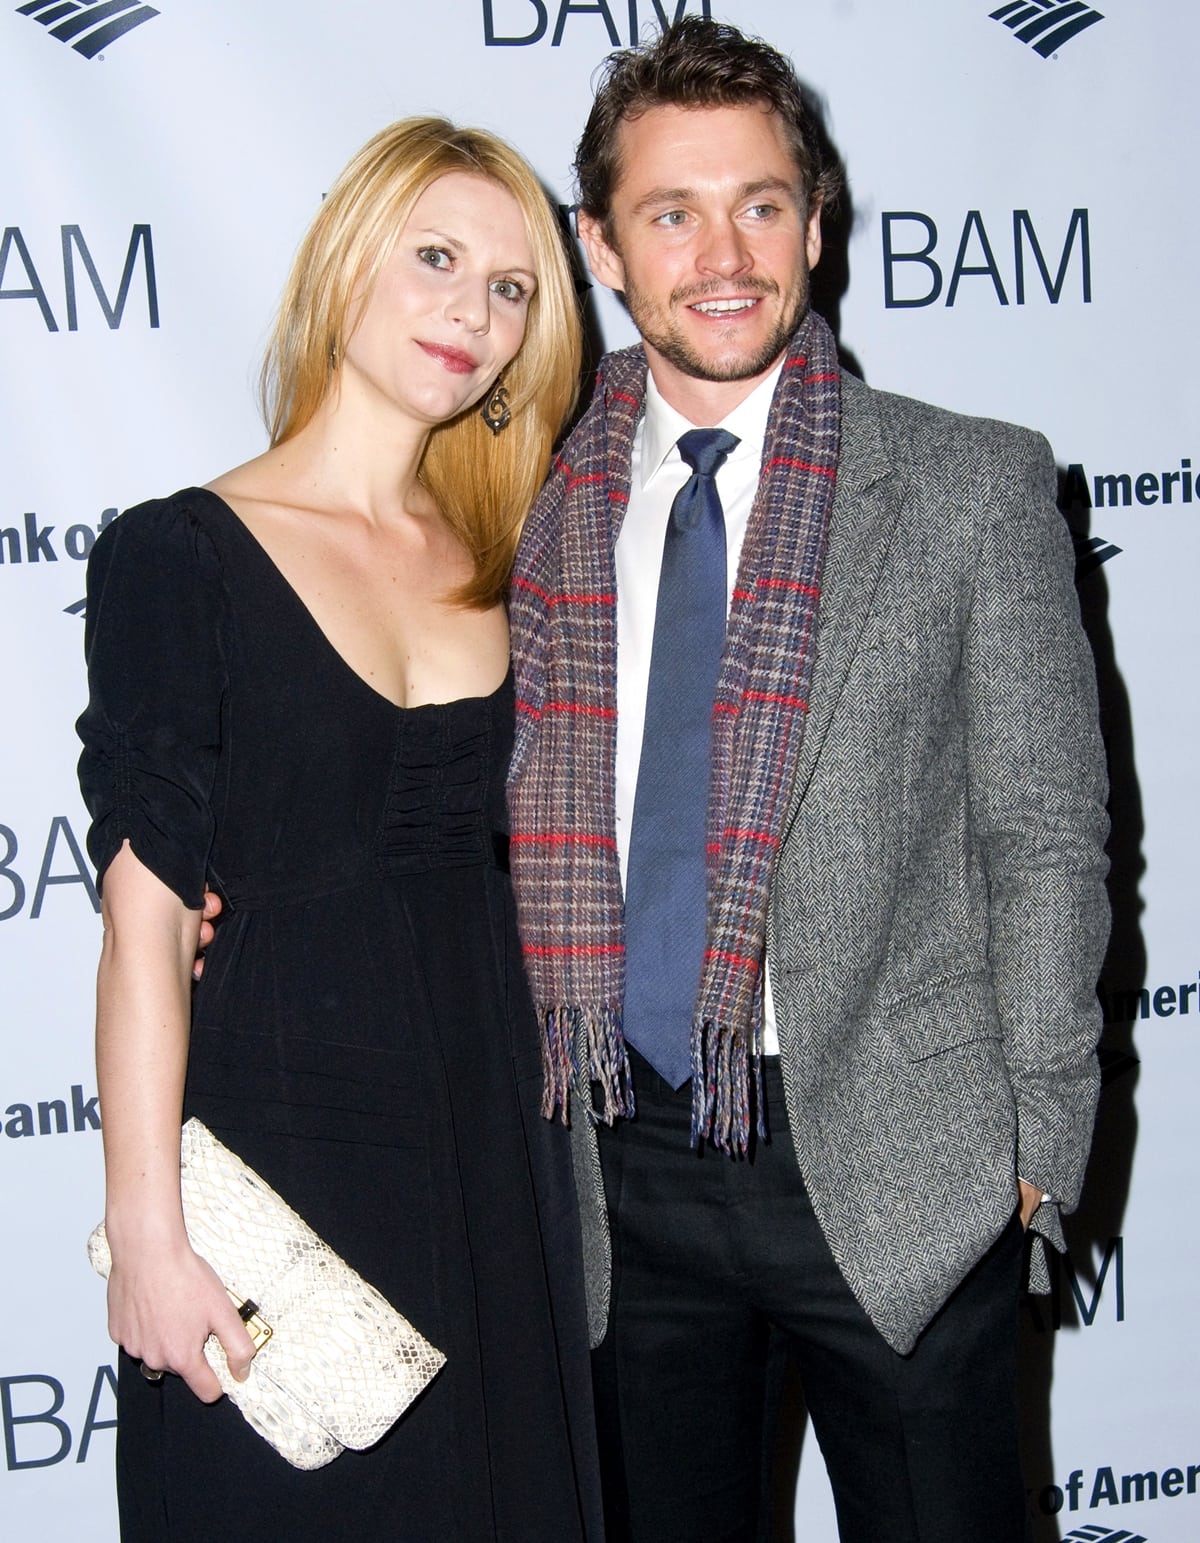 Claire Danes and Hugh Dancy married in France in 2009, two years after meeting on the set of the 2007 film Evening